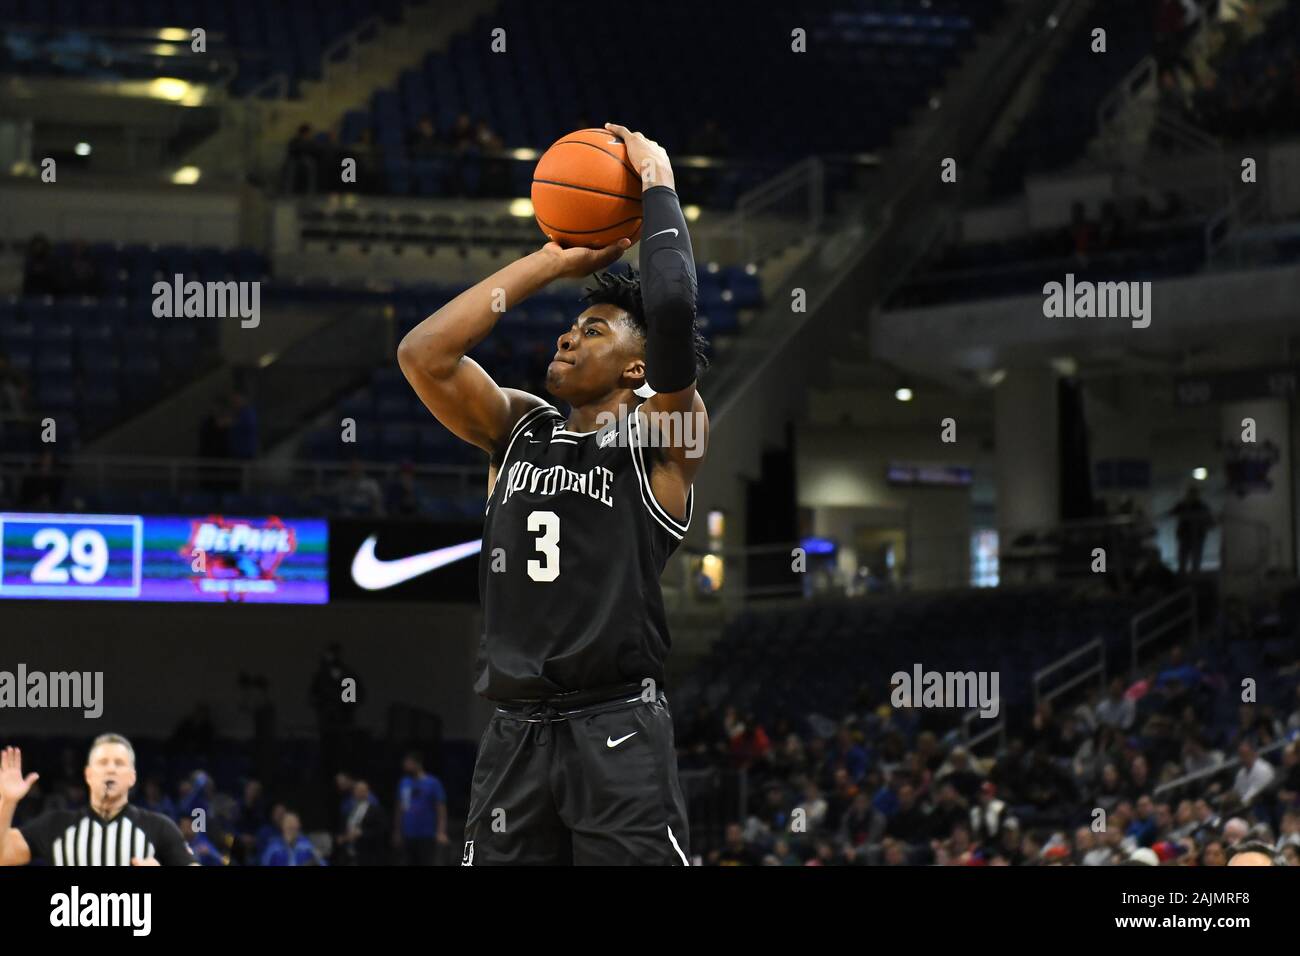 Chicago, Illinois, USA. 04th Jan, 2020. Providence Friars guard David Duke (3) attempting a jump shot during the NCAA Big East conference basketball game between DePaul vs Providence at Wintrust Area in Chicago, Illinois. Dean Reid/CSM/Alamy Live News Stock Photo